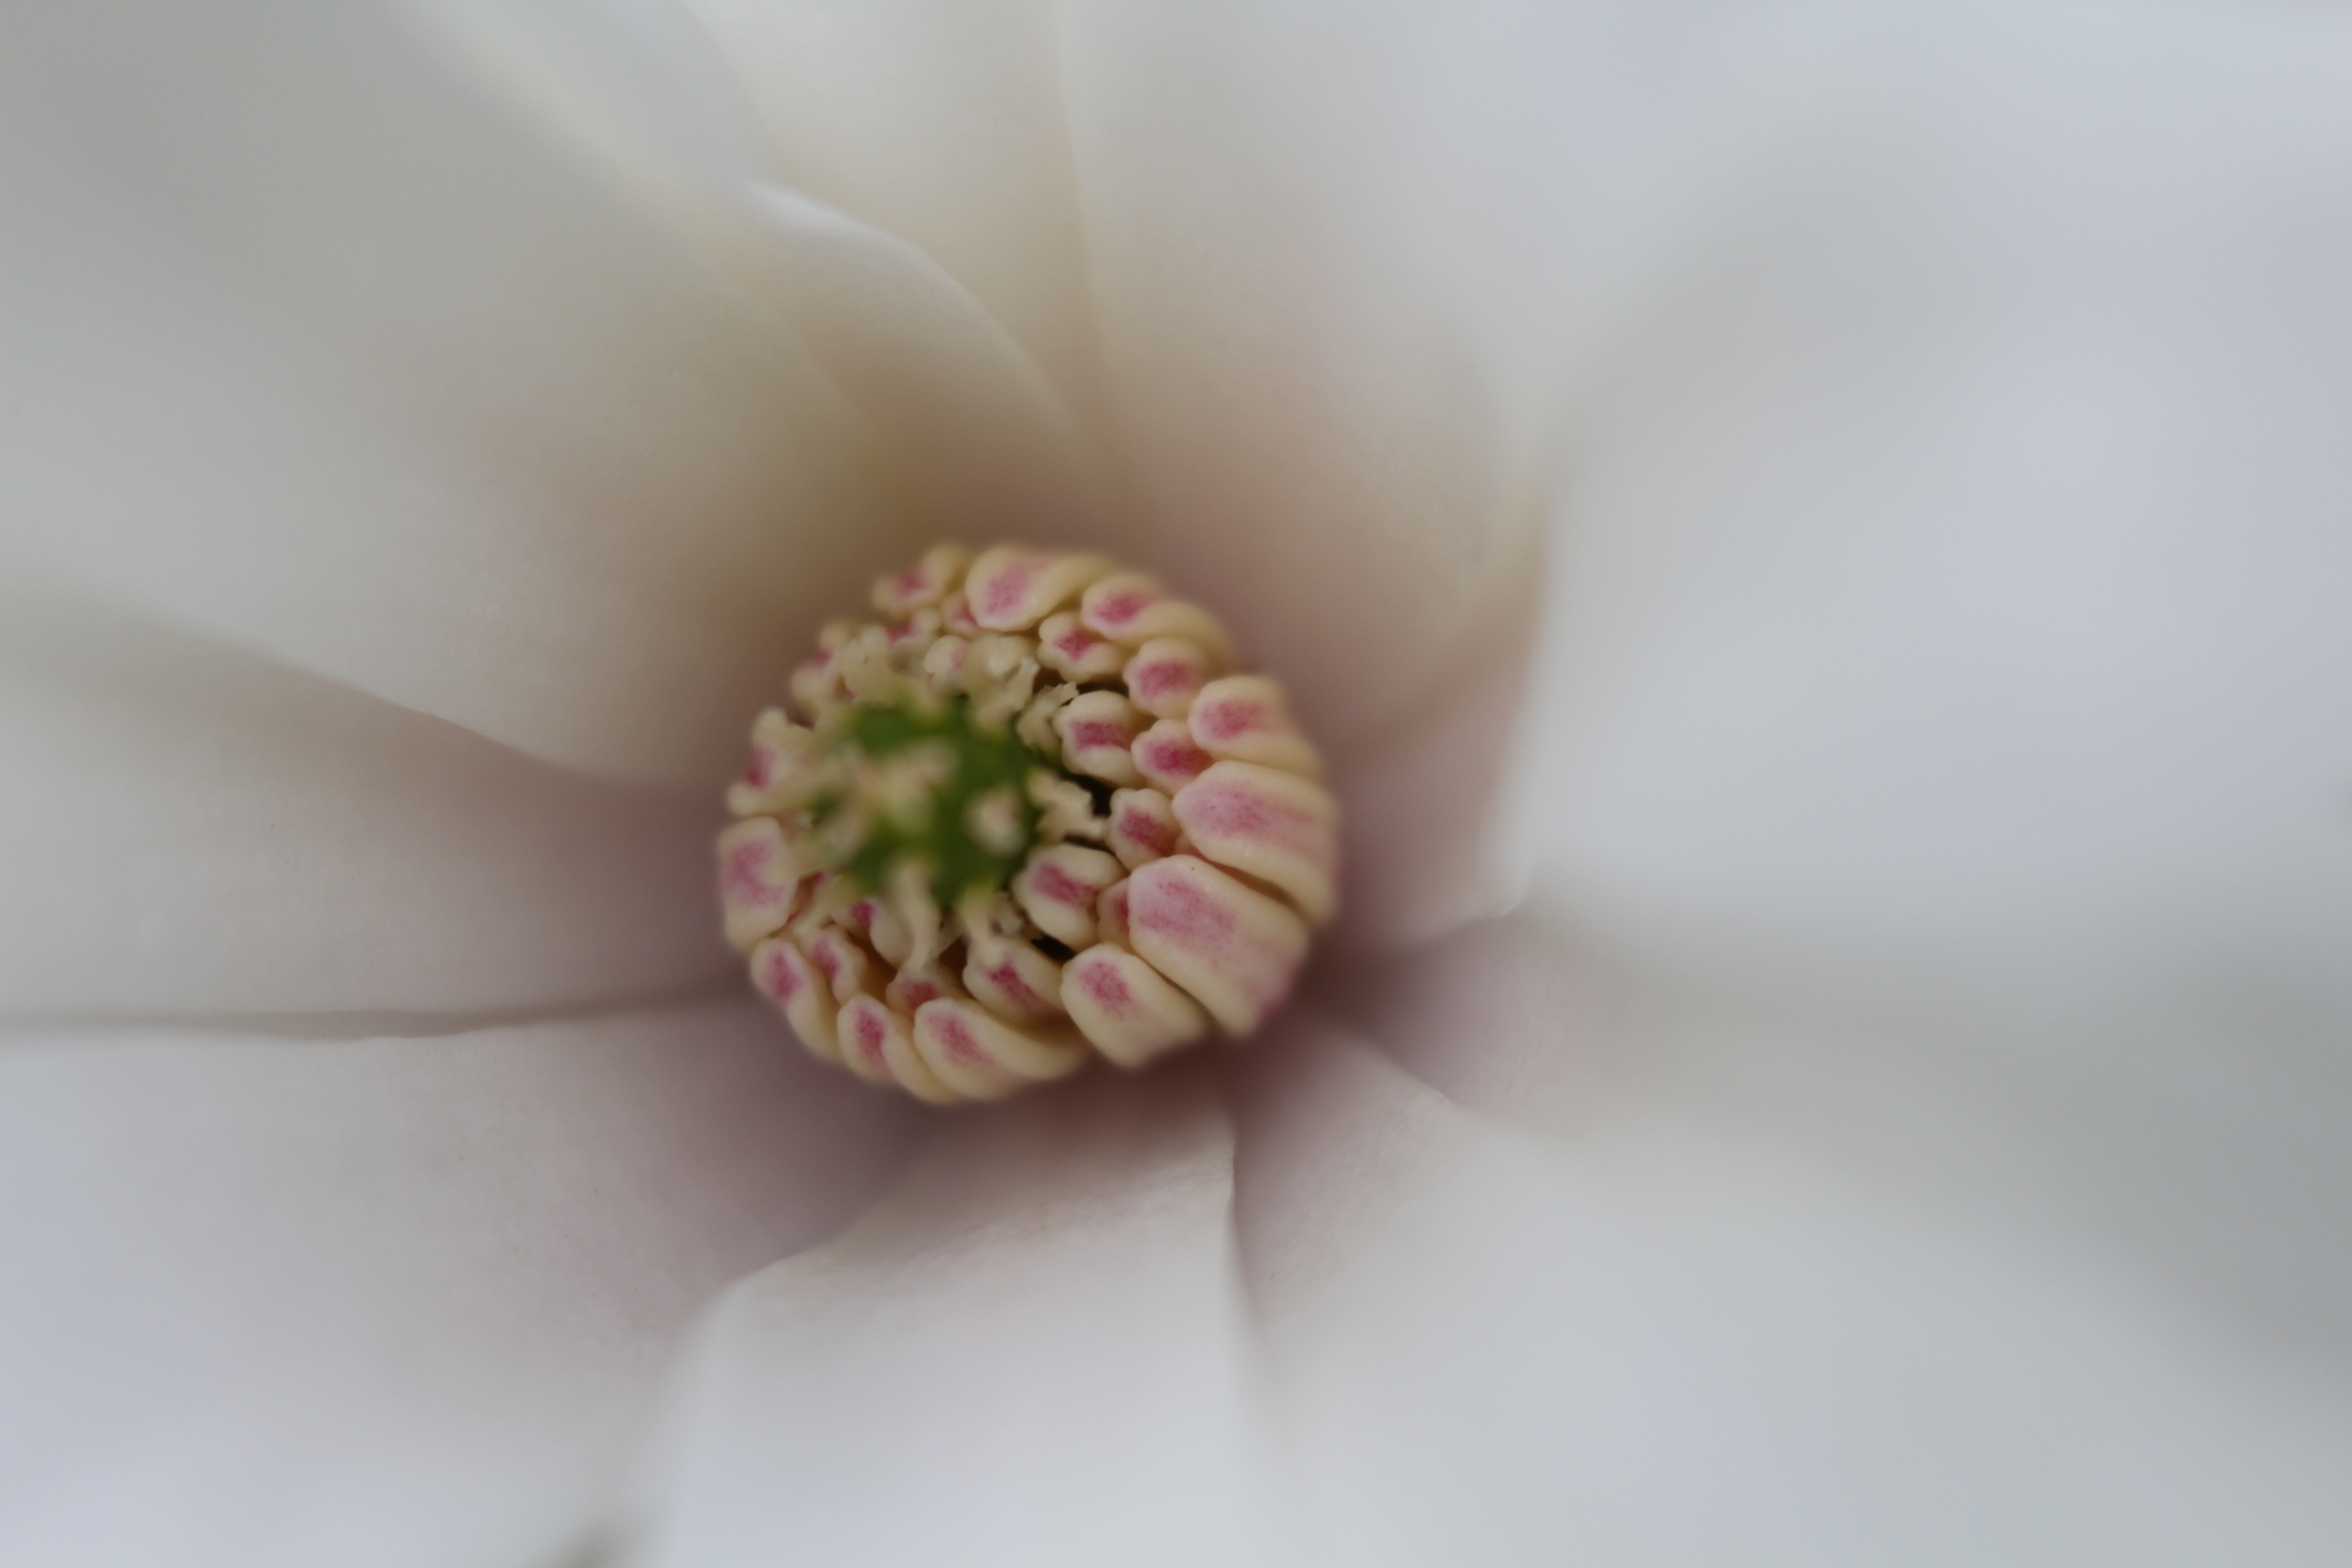 A simple magnolia from my yard.